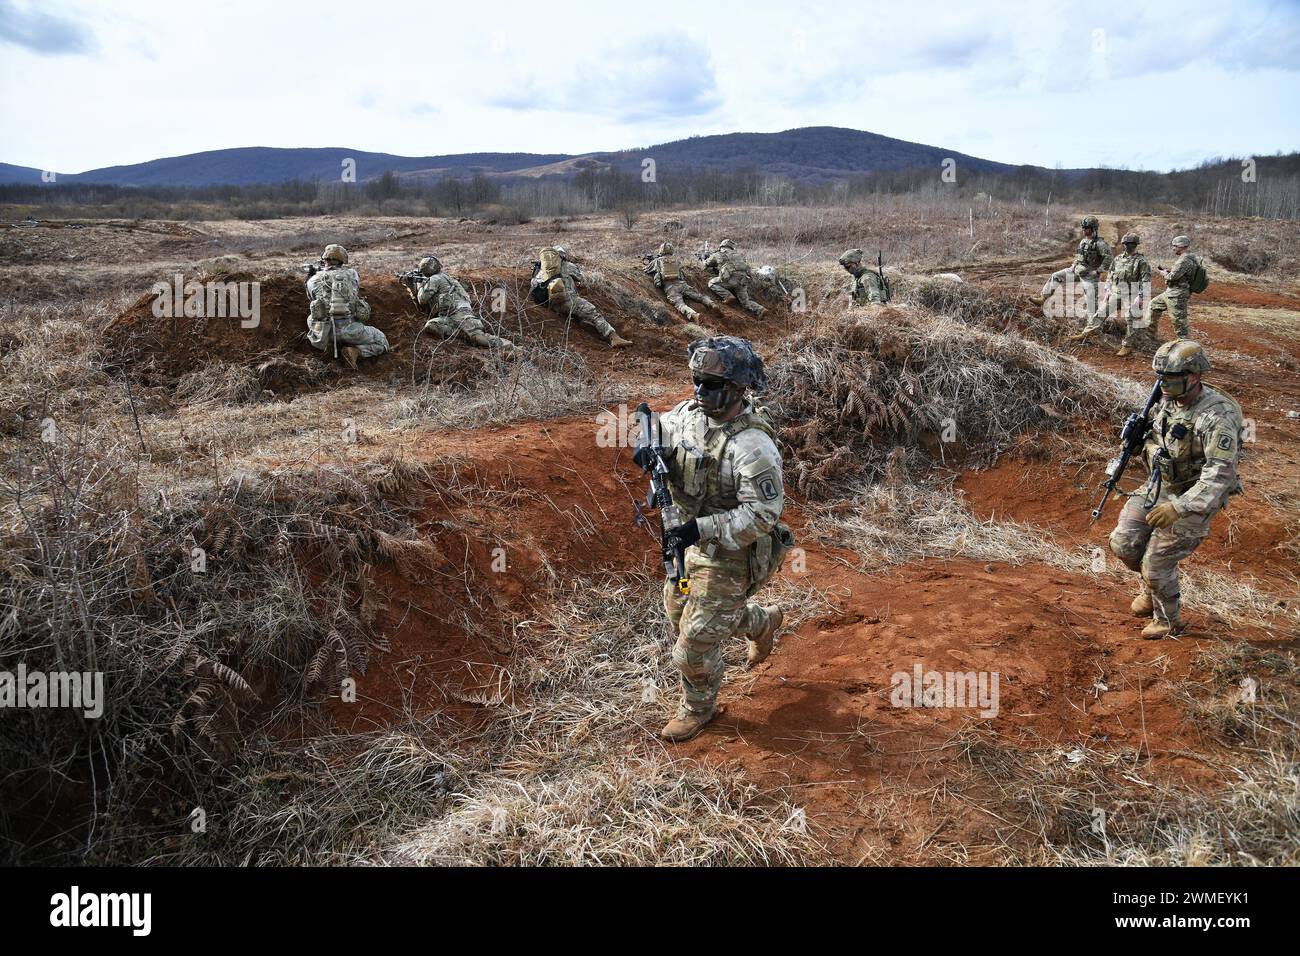 U.S. Army Paratroopers assigned to the 1st Battalion, 503rd Infantry Regiment, 173rd Airborne Brigade, engage a target during team blank-fire and tactical movement training  as part of Eagle Ursa at the training range in Slunj, Croatia, Feb. 24, 2024. The 173rd Airborne Brigade is the U.S. Army's Contingency Response Force in Europe, providing rapidly deployable forces to the United States European, African, and Central Command areas of responsibility. Forward deployed across Italy and Germany, the brigade routinely trains alongside NATO allies and partners to build partnerships and strengthen Stock Photo